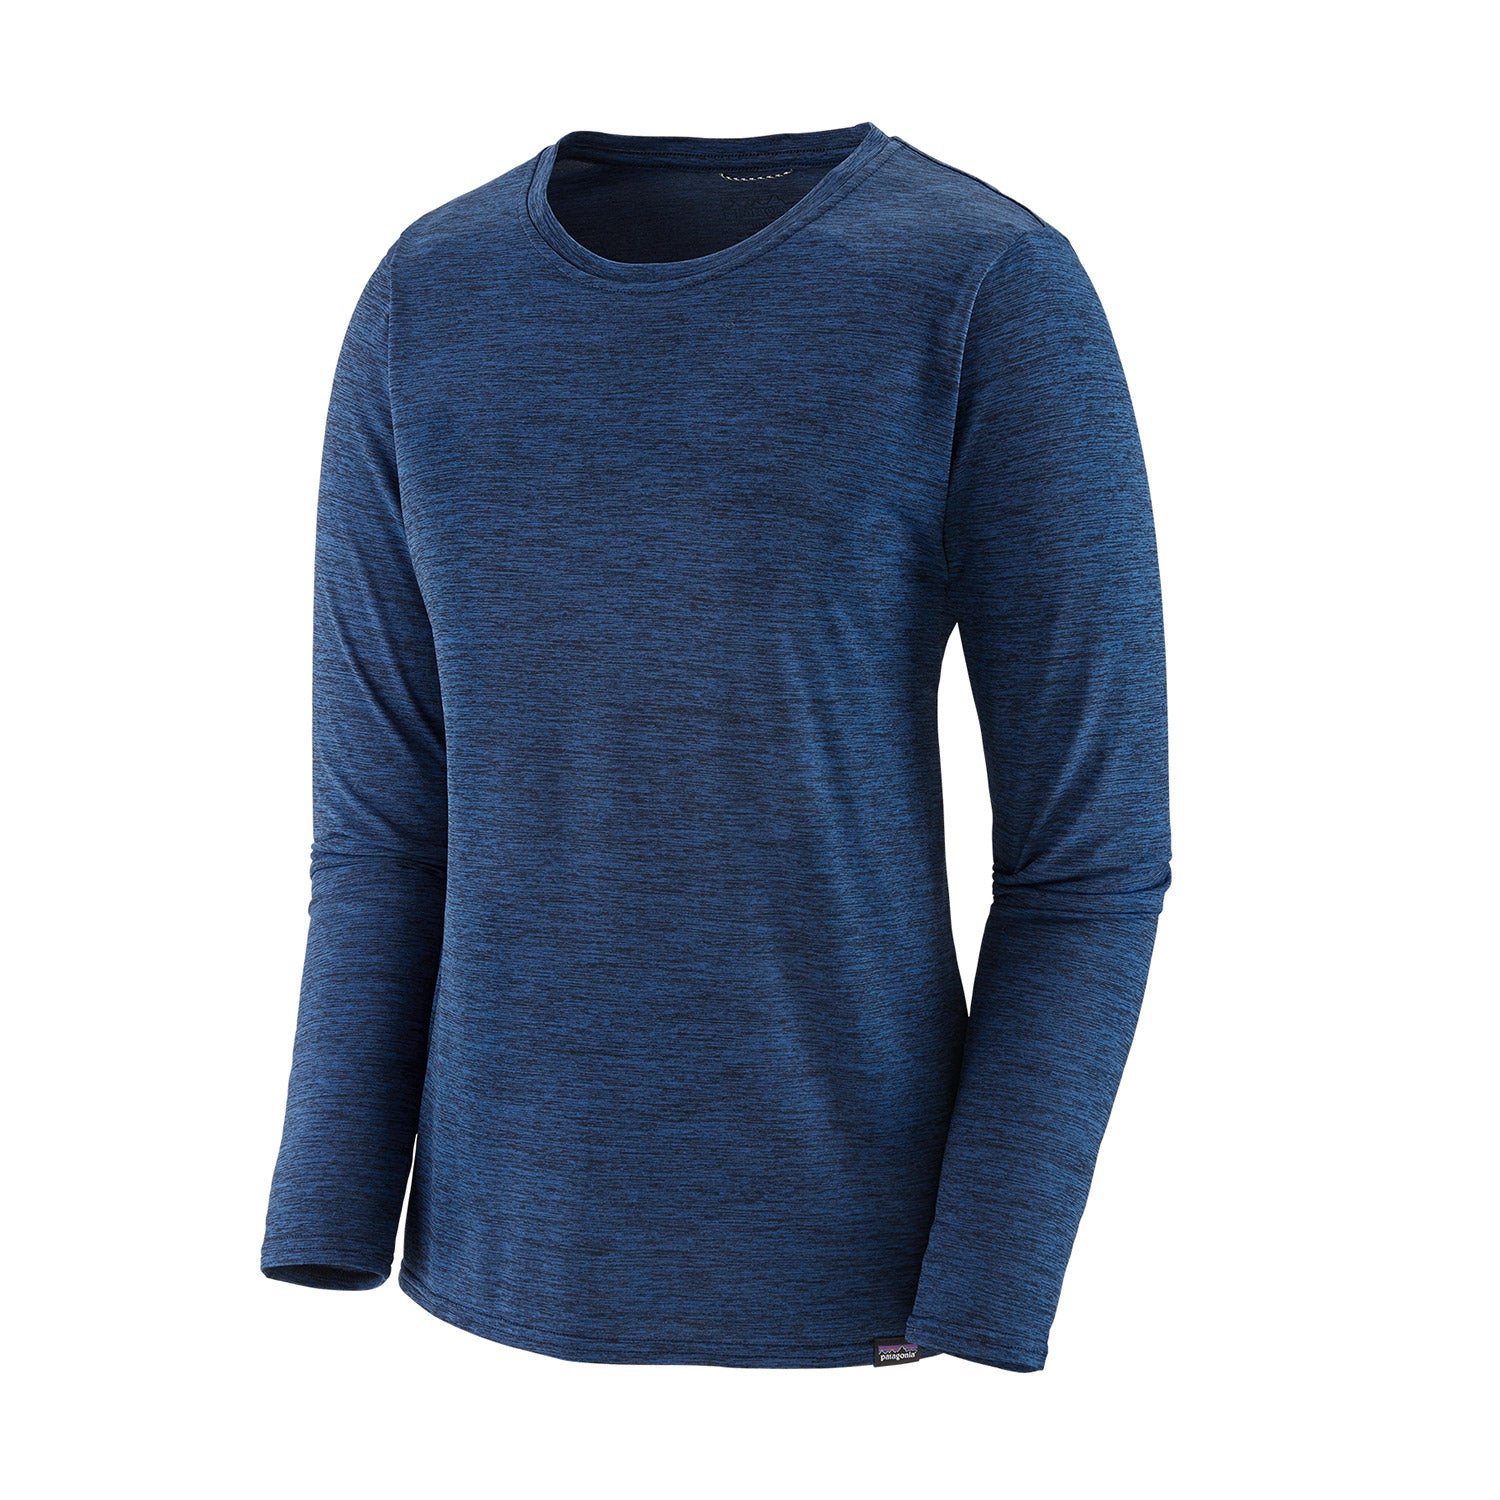 patagonia womens long sleeve capilene daily shirt in viking blue - navy blue x dye, front view